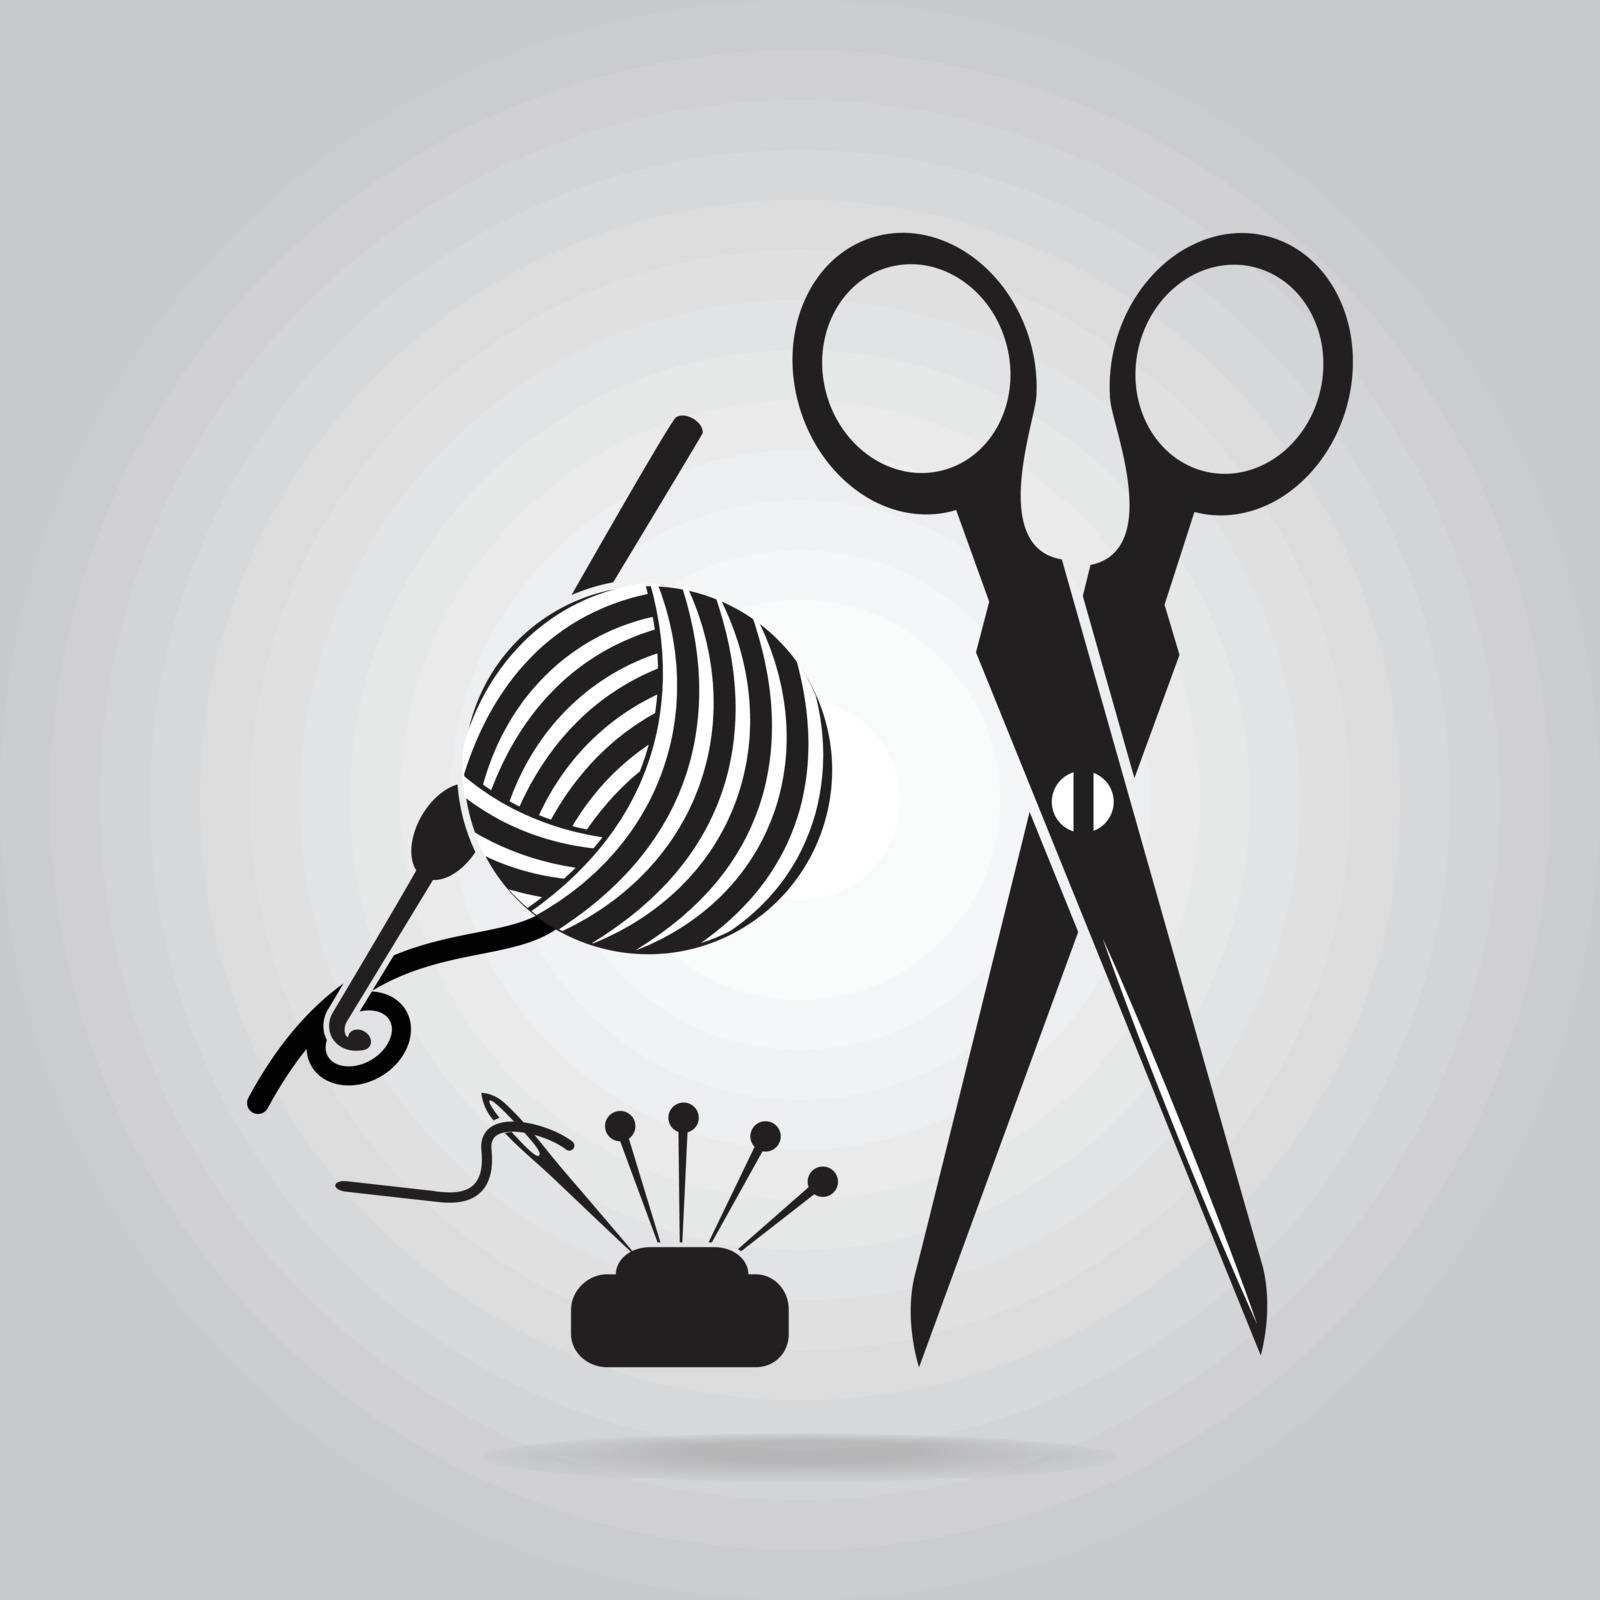 Sewing icon, scissors, yarn, and needle icon